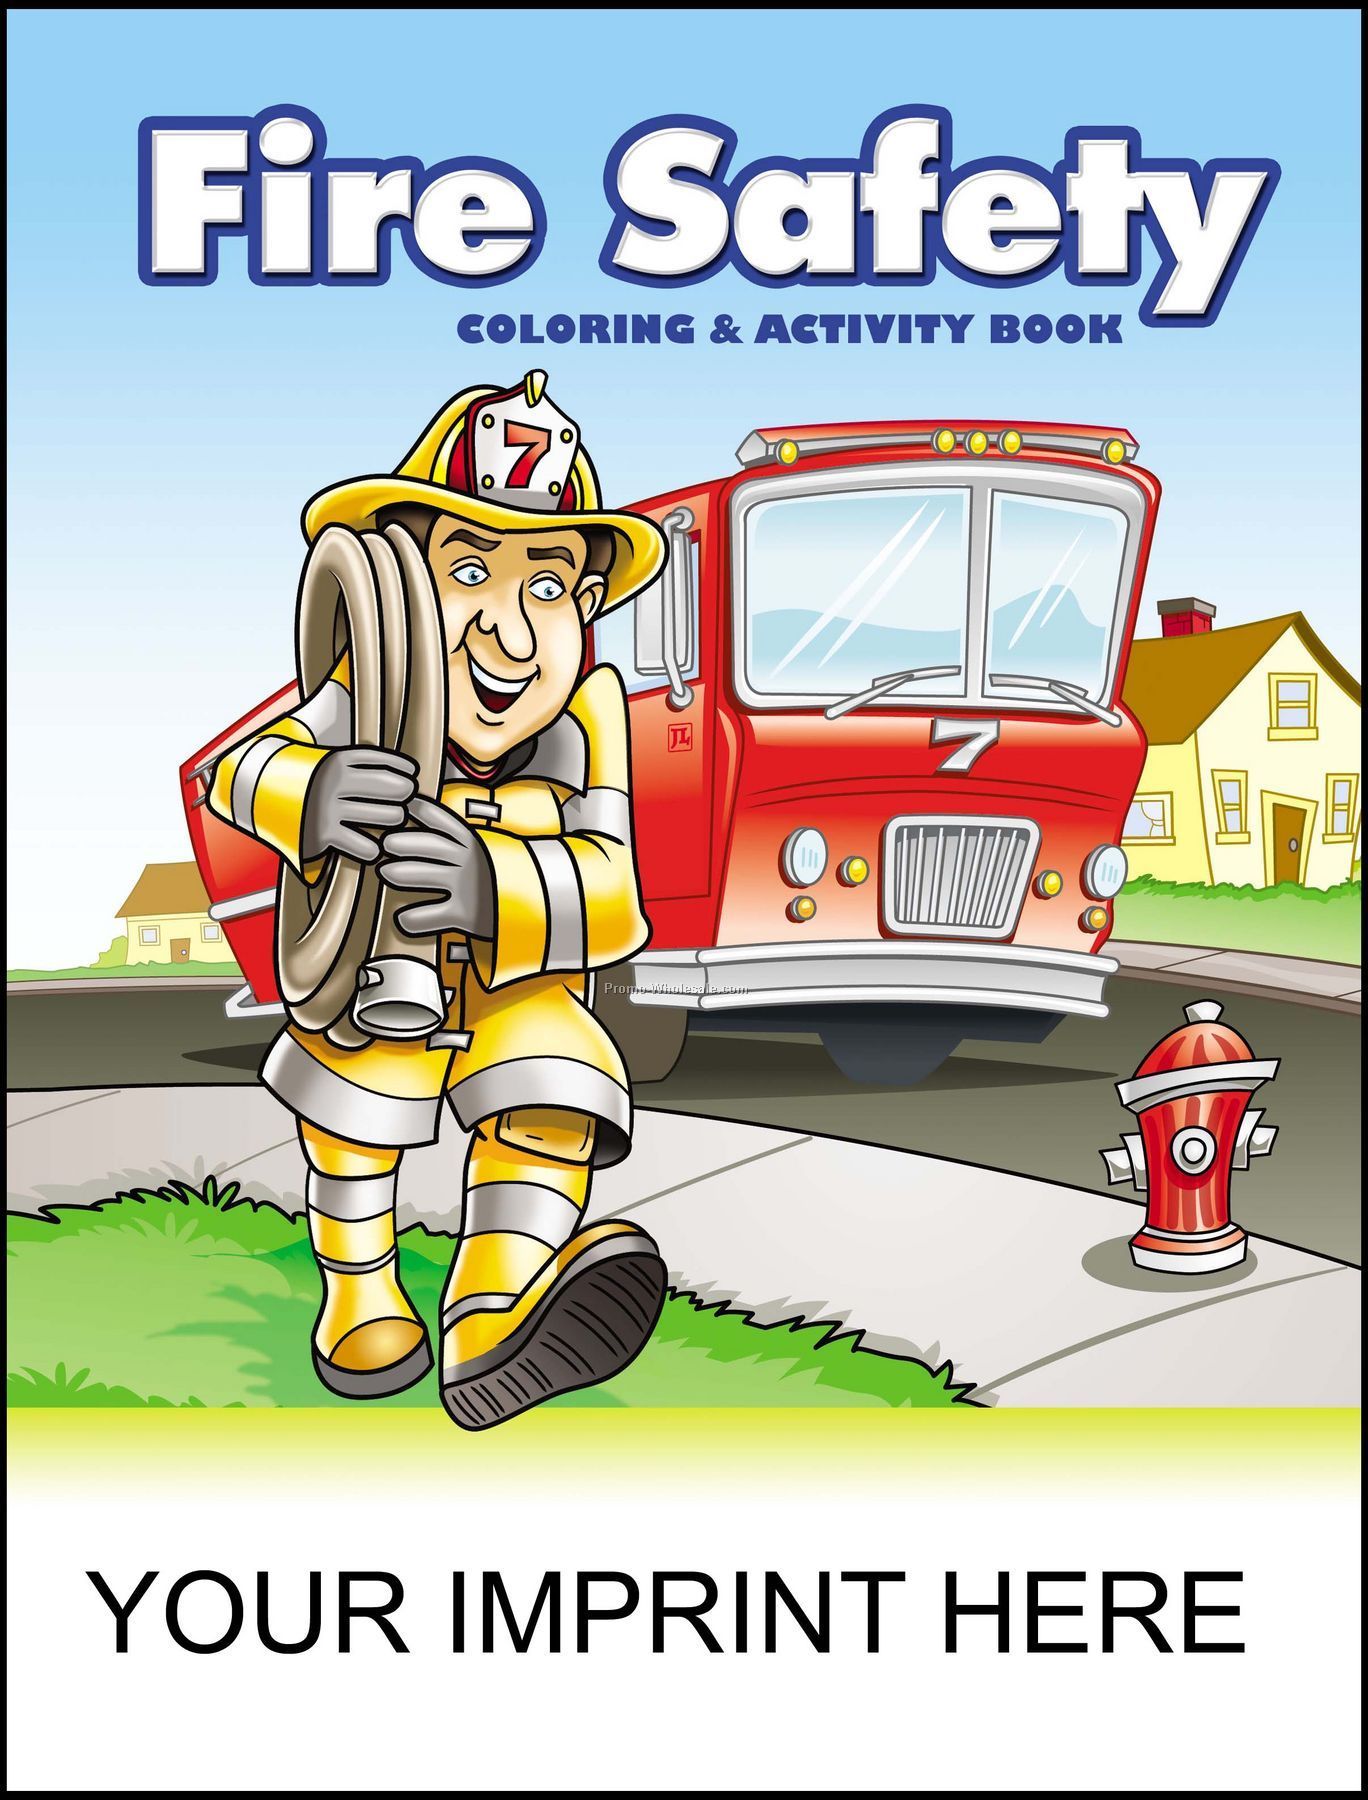 8-3/8"x10-7/8" Fire Safety Coloring & Activity Book